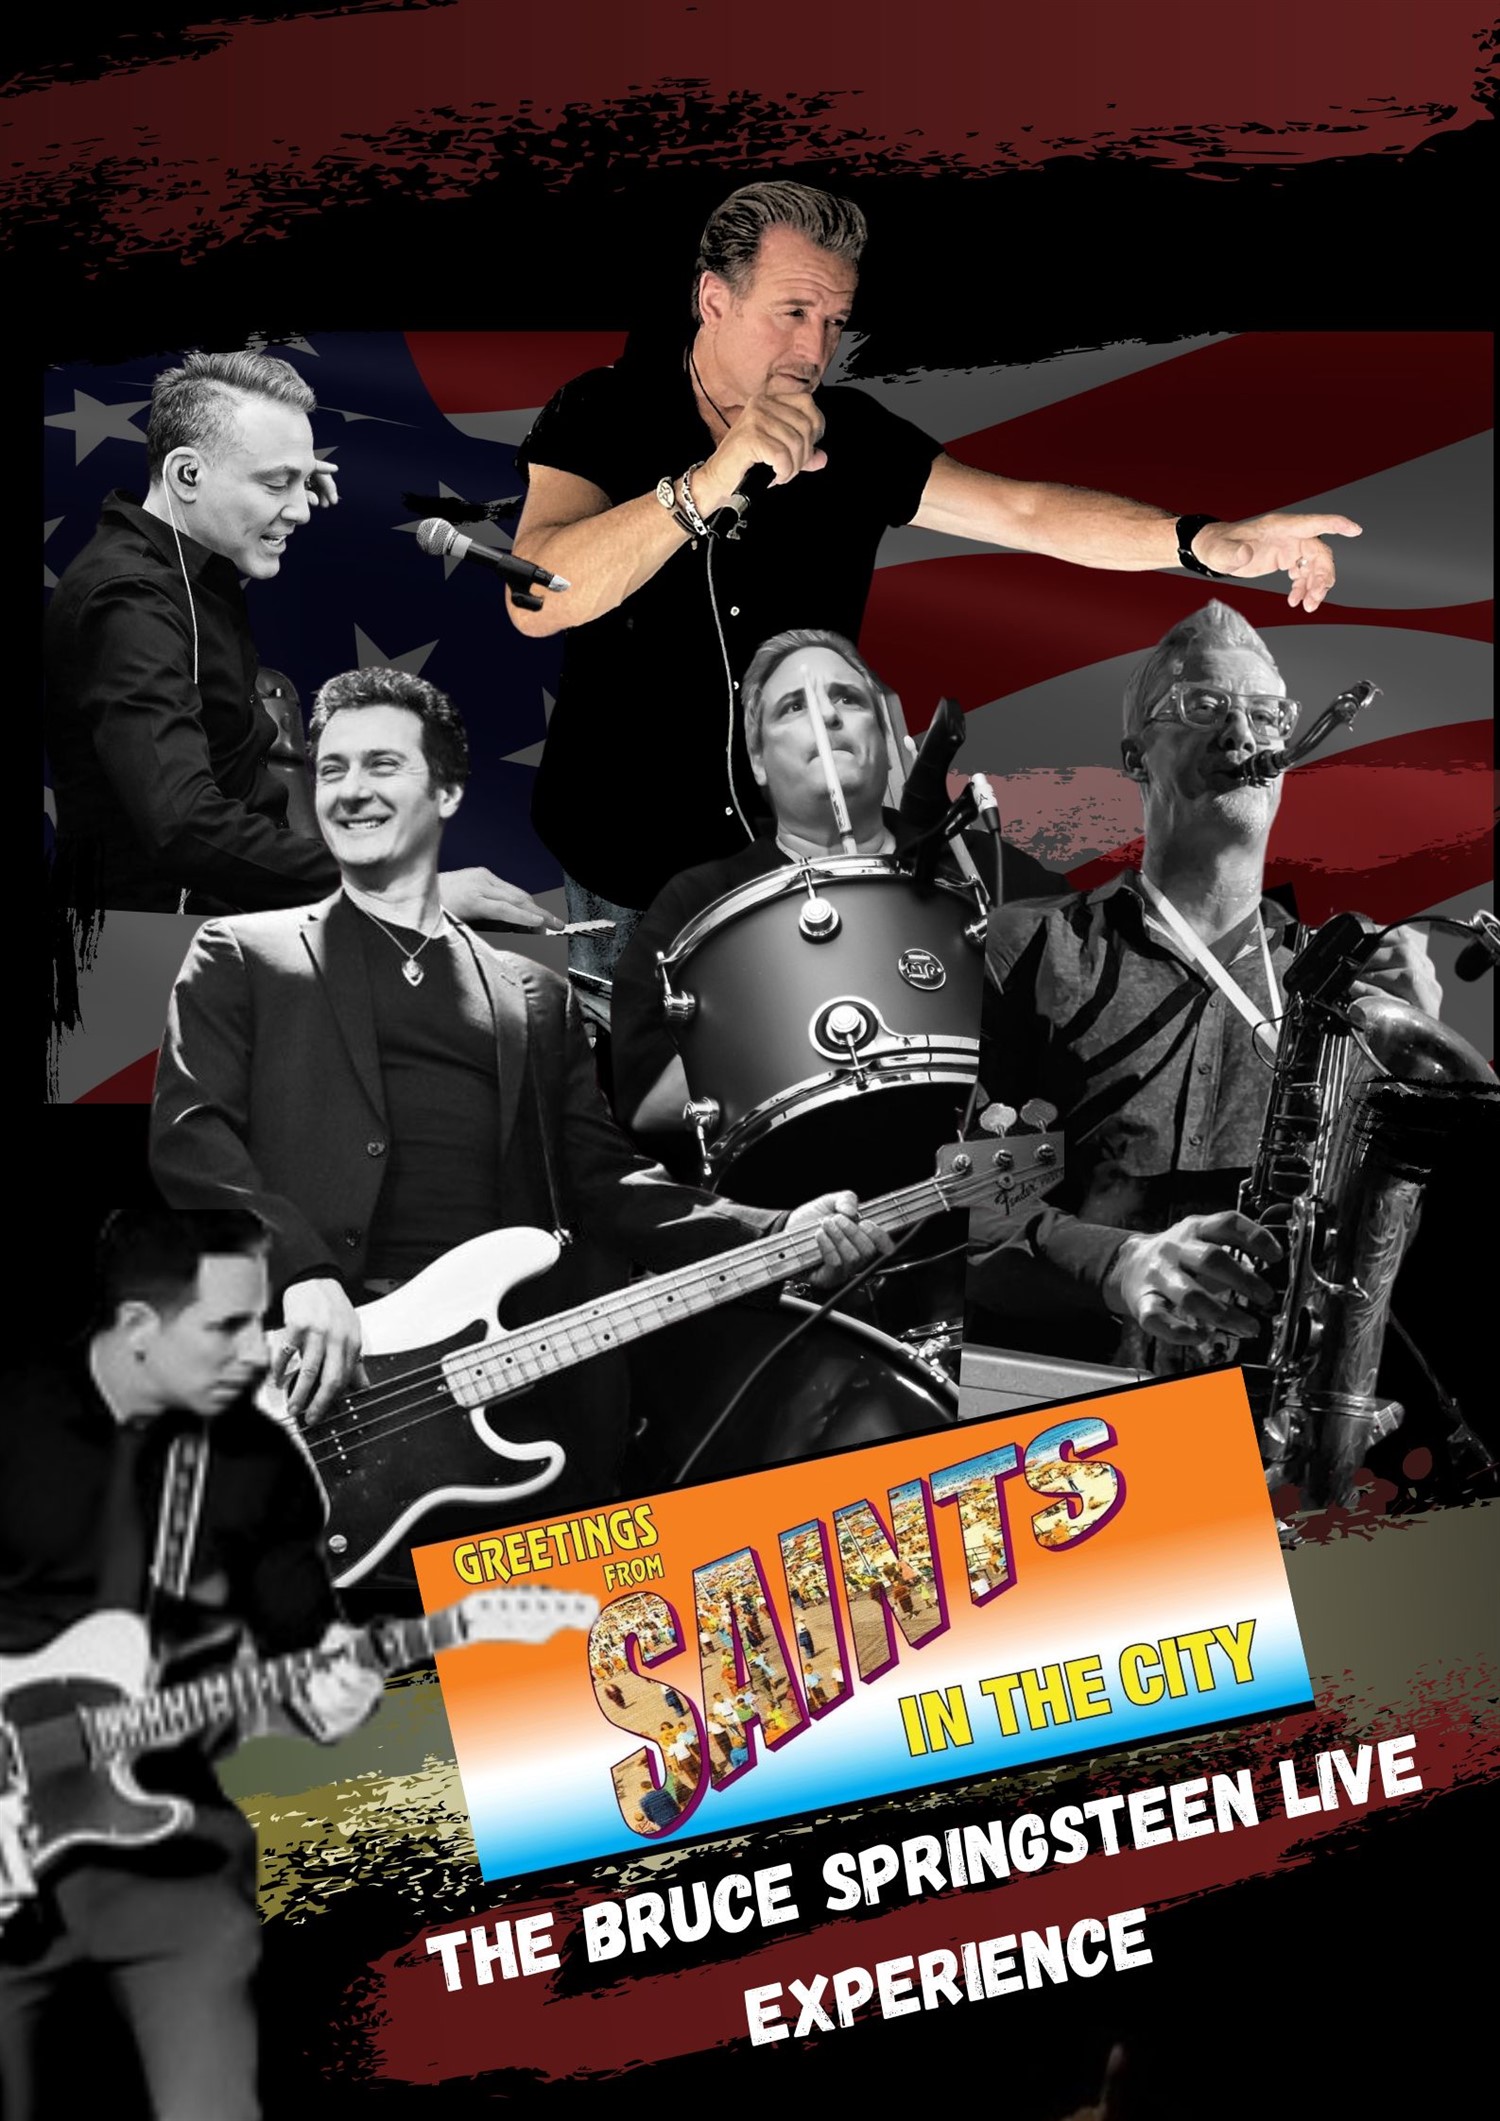 Saints in the City The Bruce Springsteen Live Experience on Jan 05, 15:00@Yorktown Stage 2023 - Pick a seat, Buy tickets and Get information on Yorktown Stage 